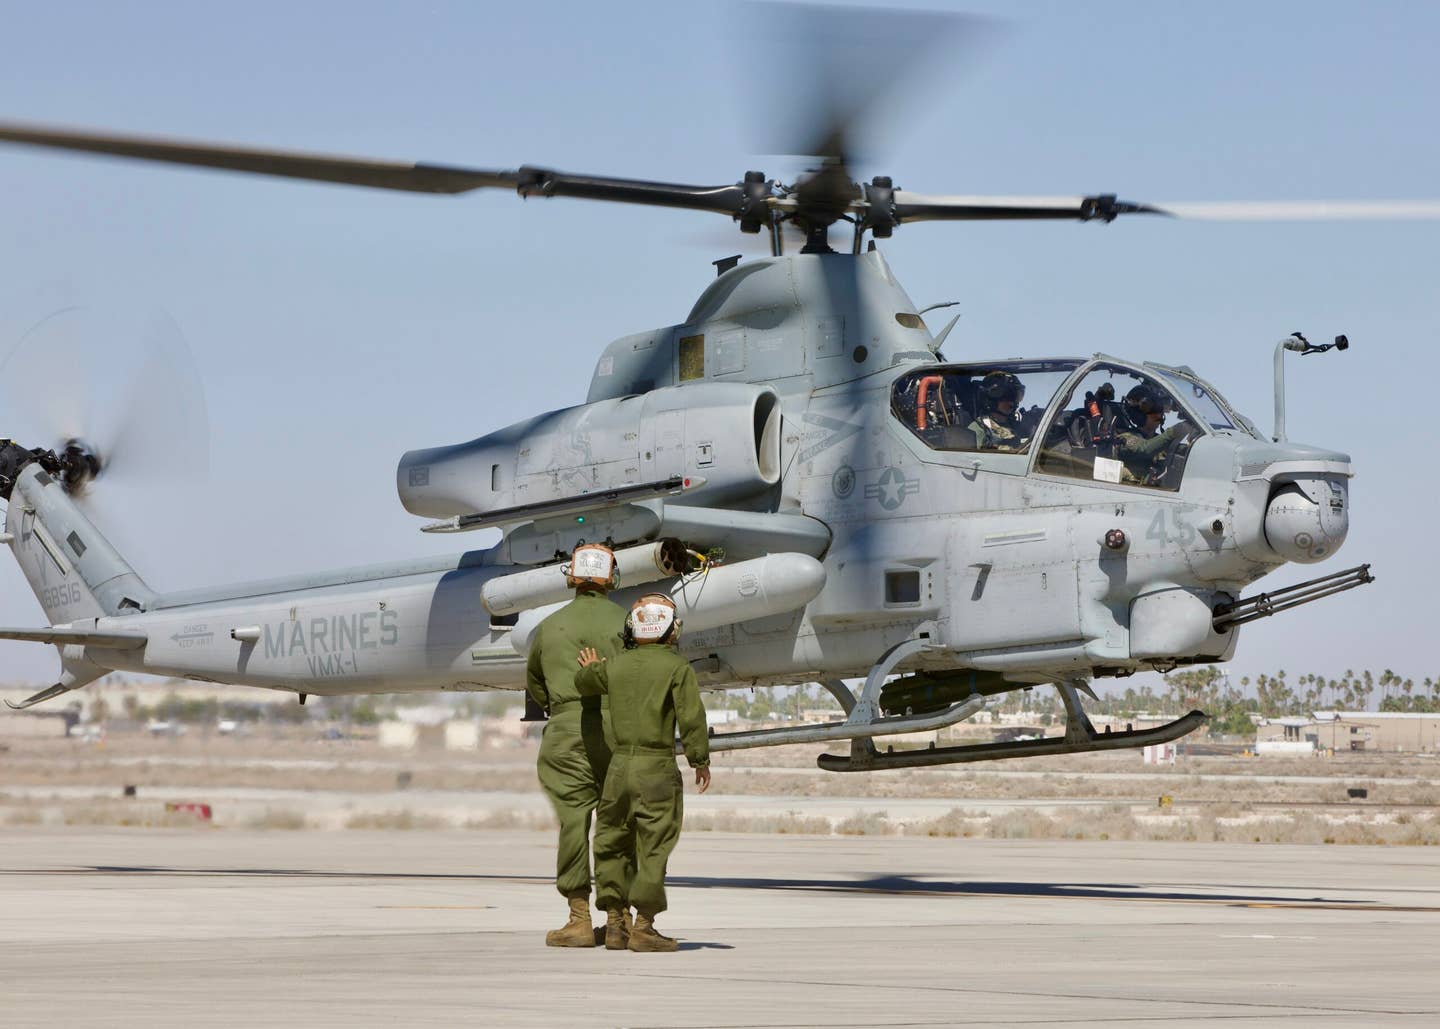 A VMX-1 AH-1Z heads out on a test mission. (Author's photo)